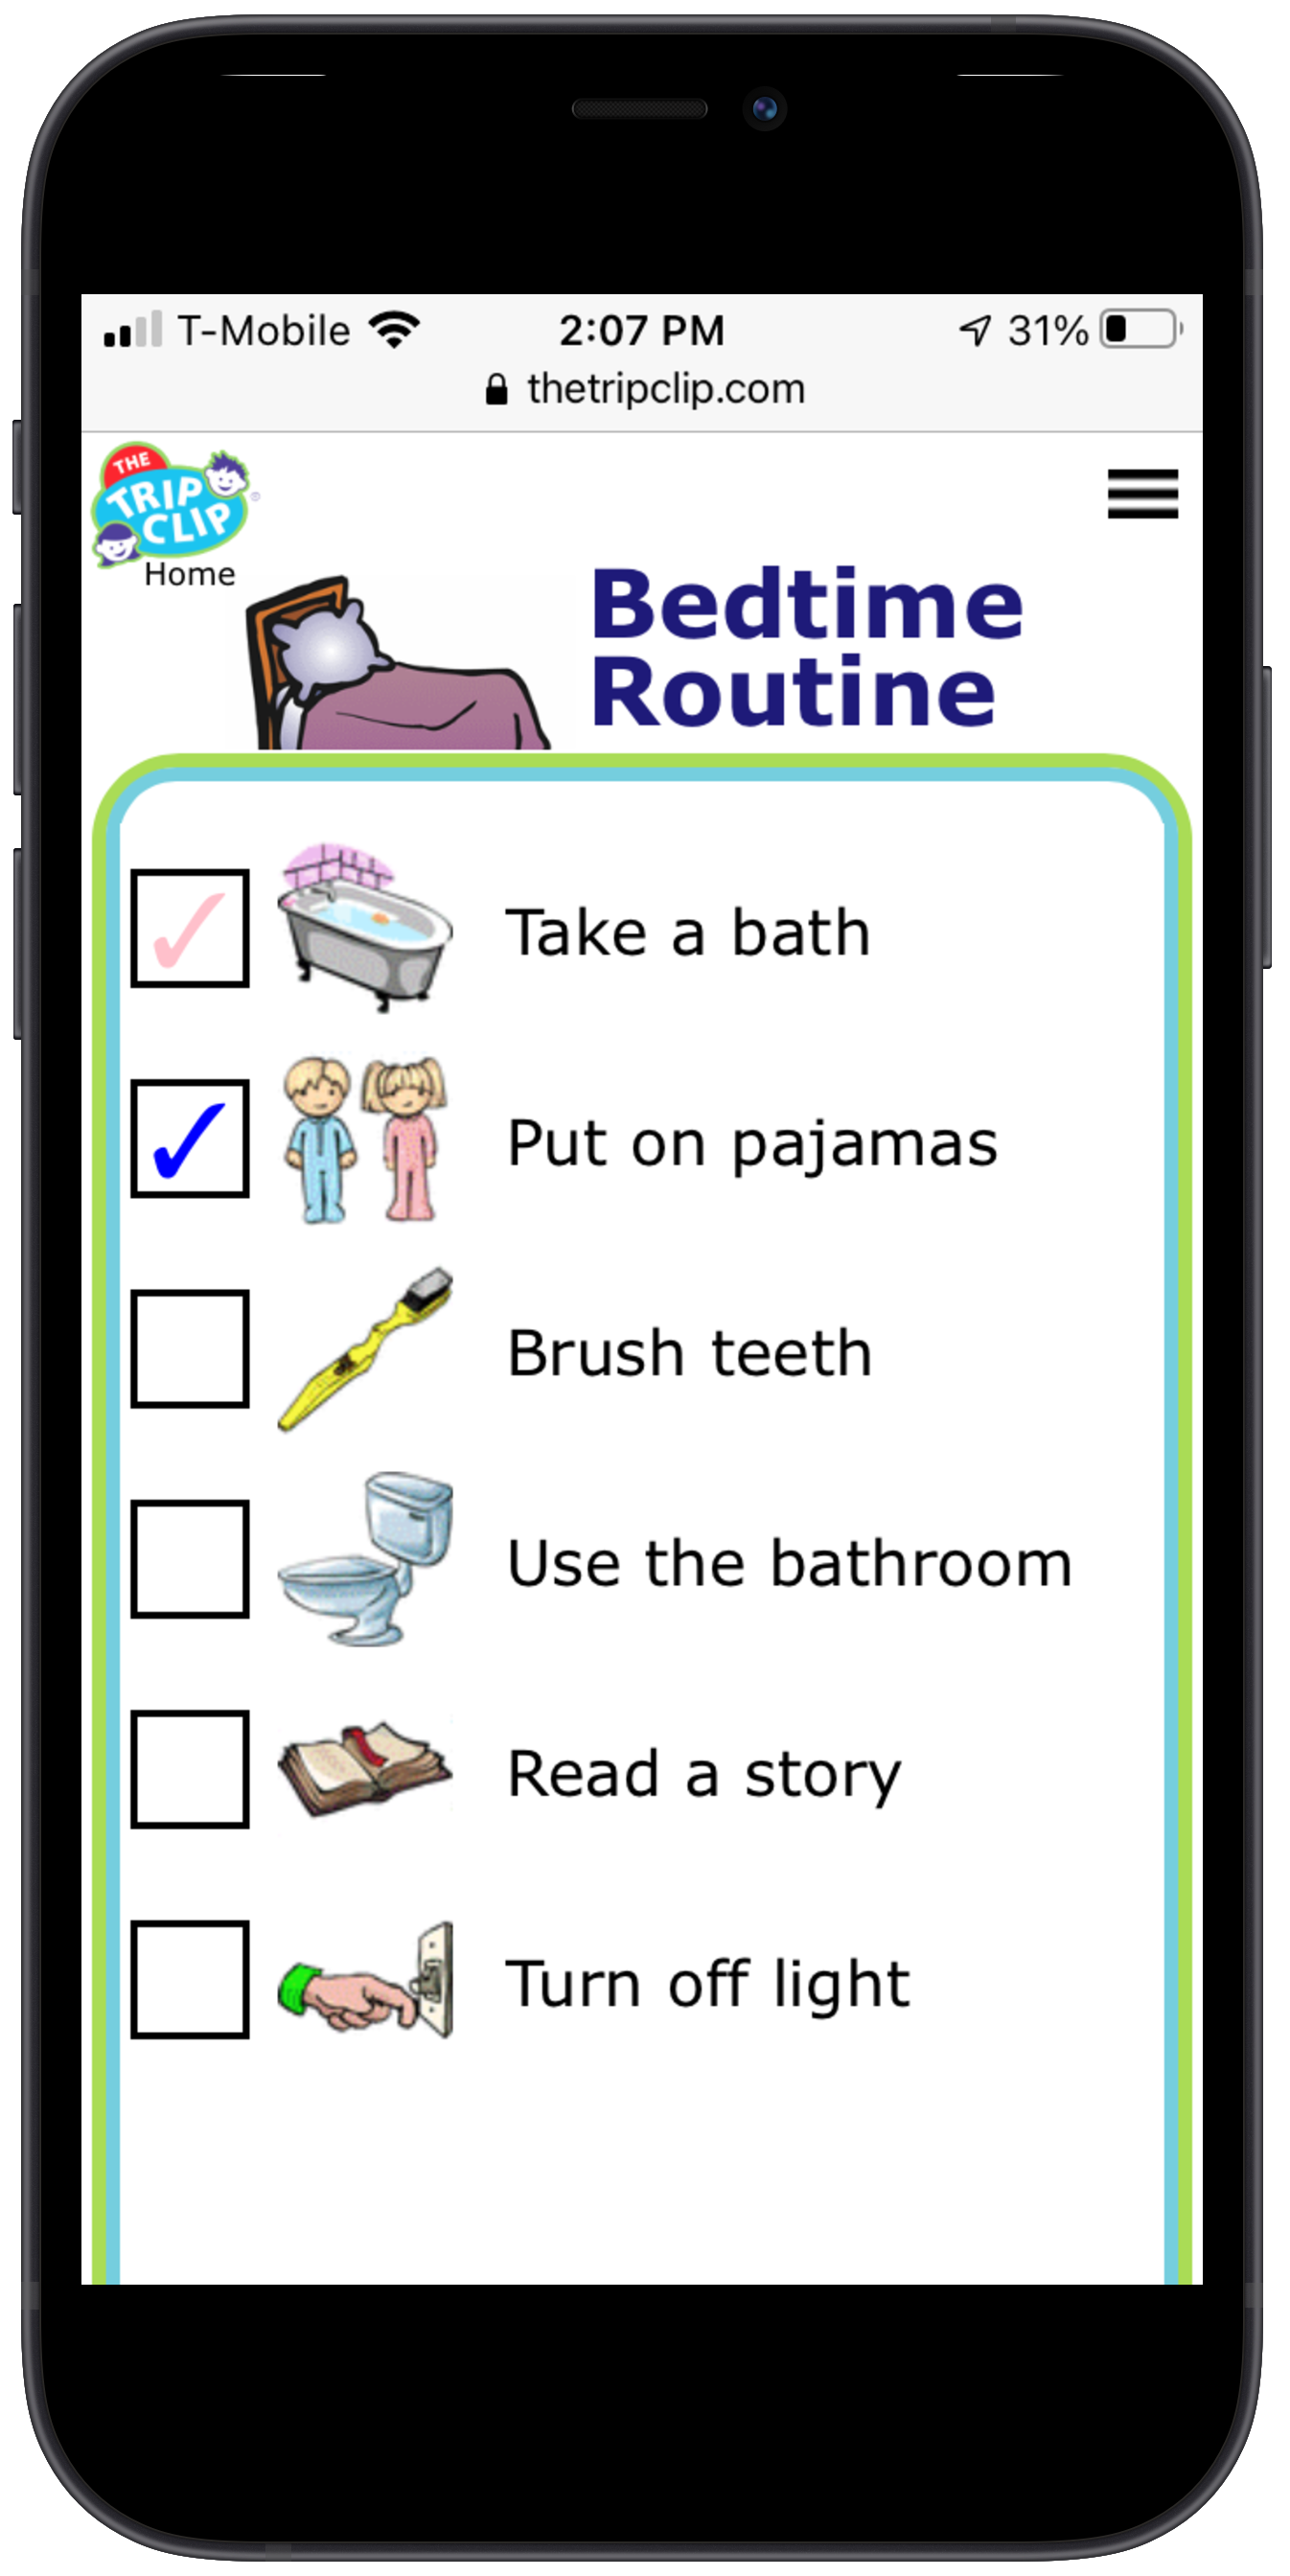 Bedtime routine picture checklist for kids on an iphone